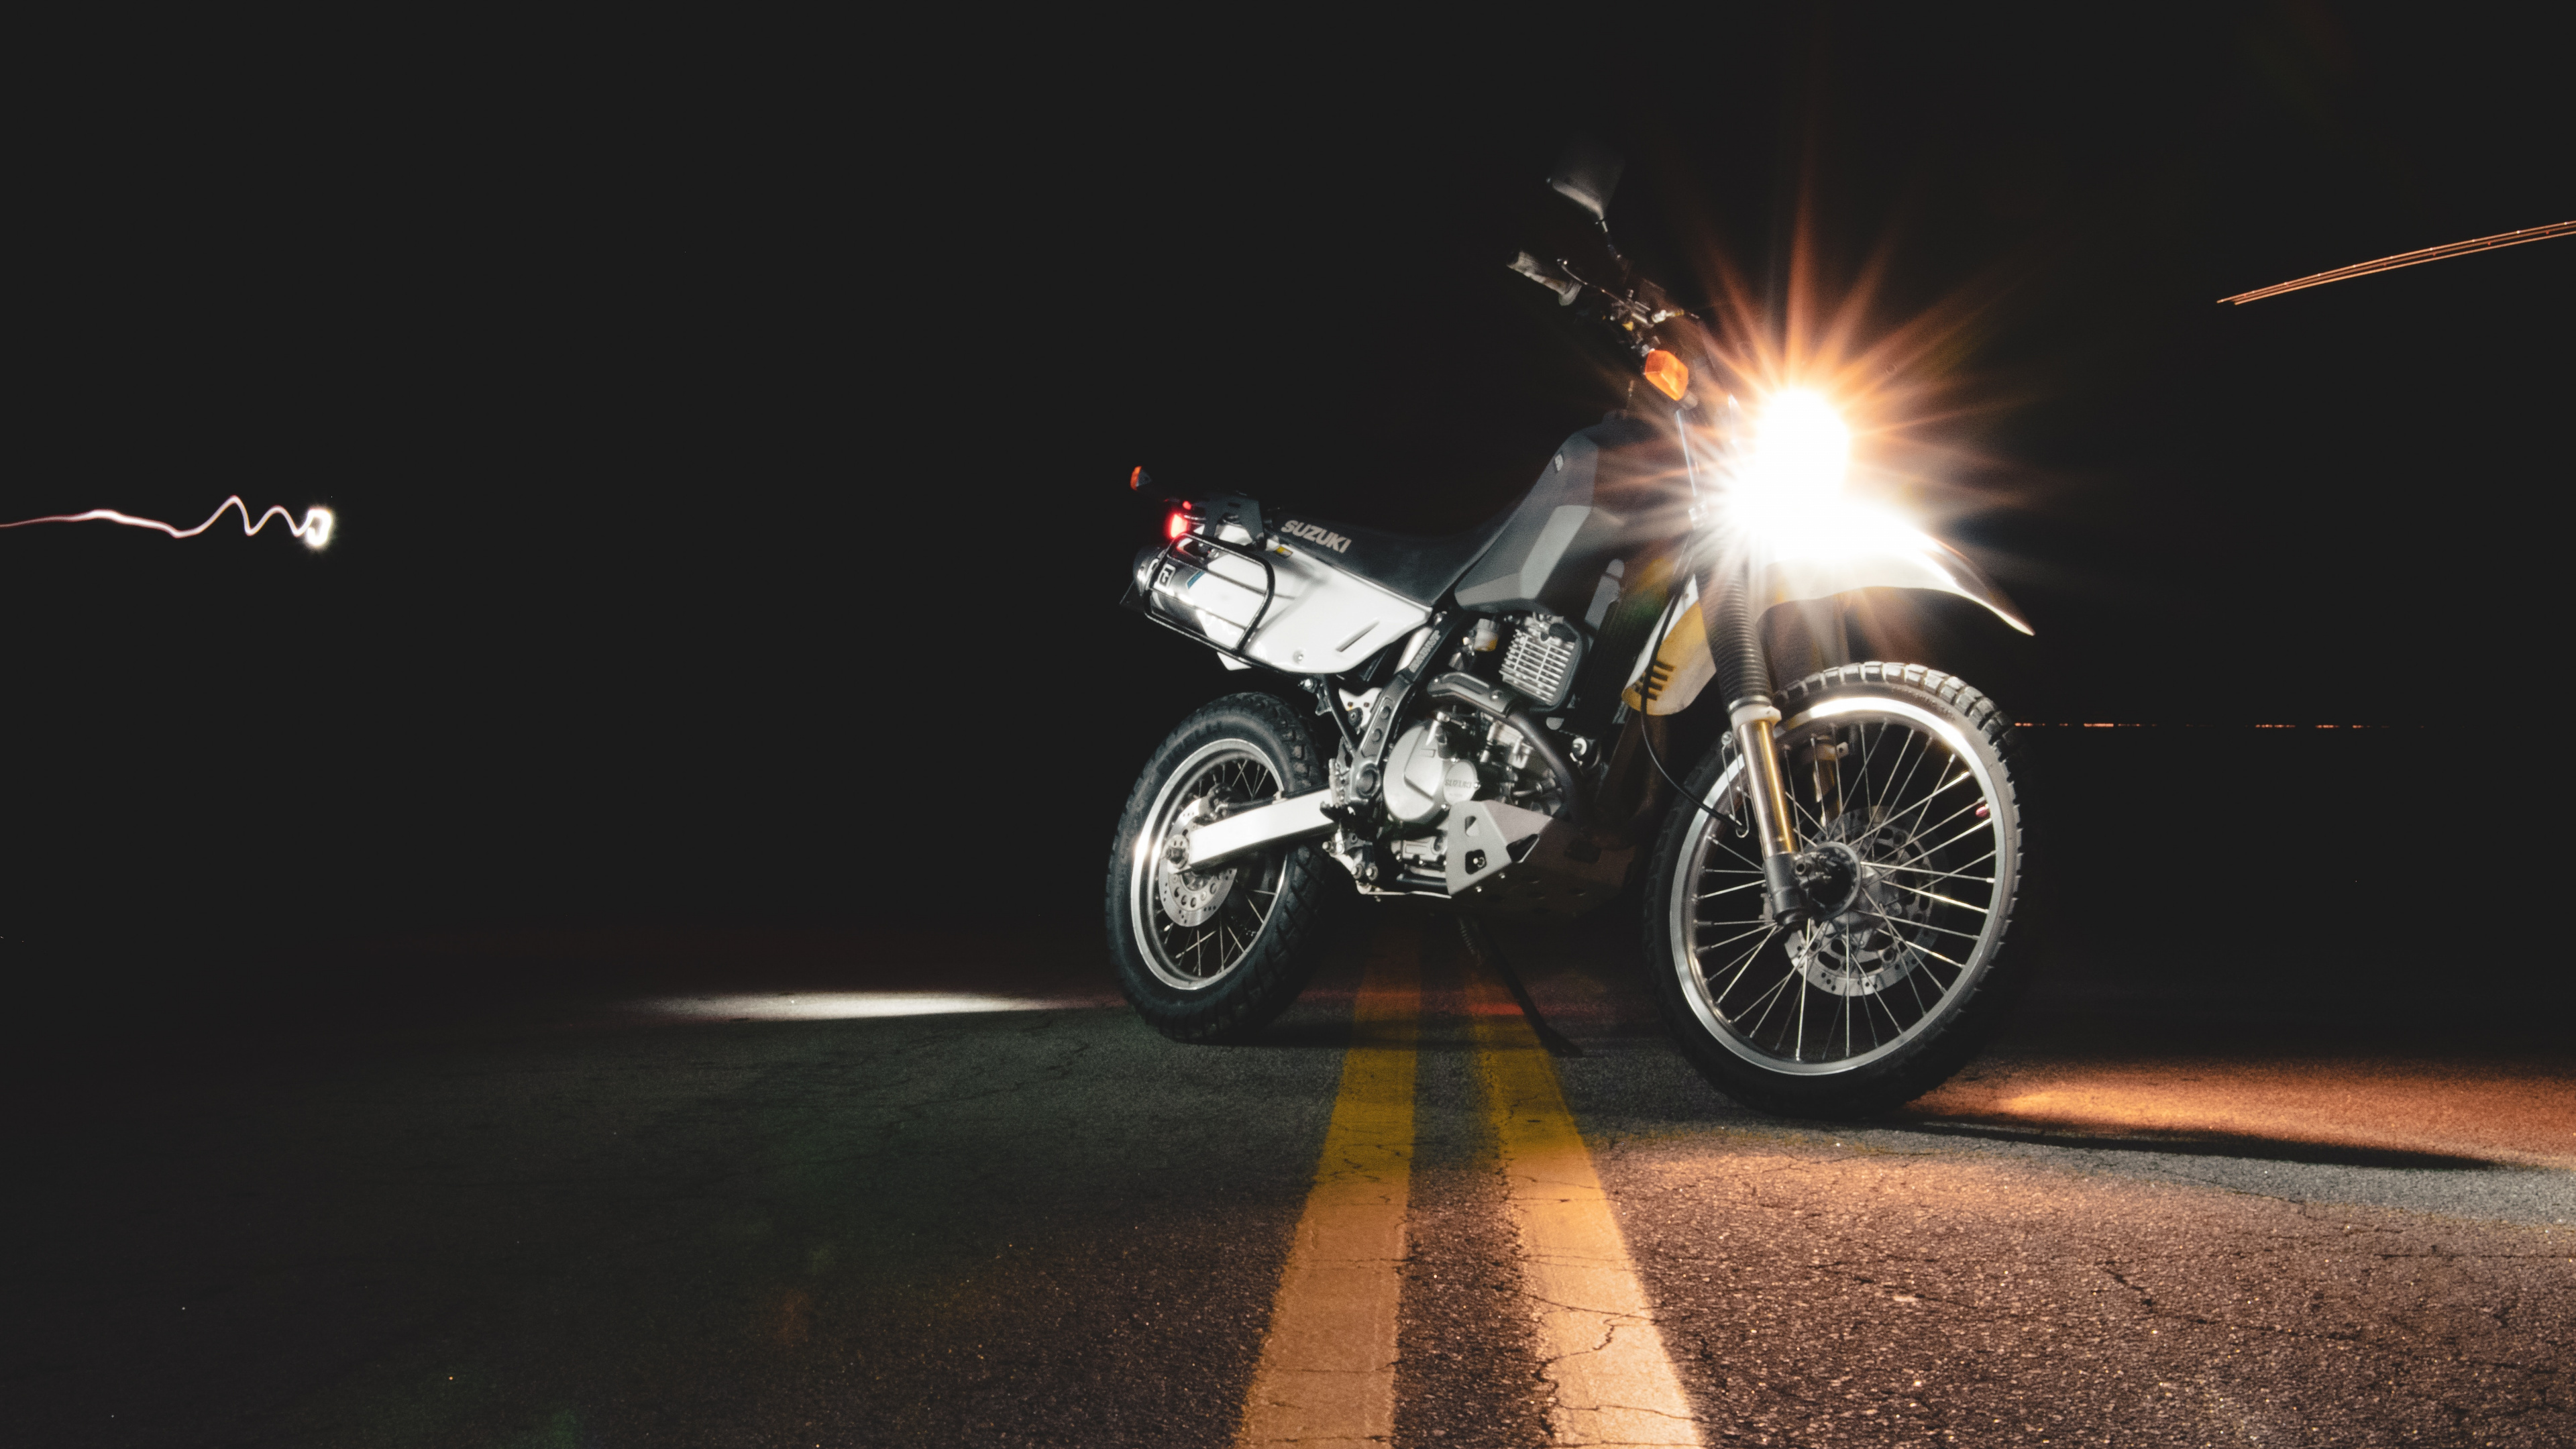 Black and Silver Motorcycle on Road During Night Time. Wallpaper in 3840x2160 Resolution